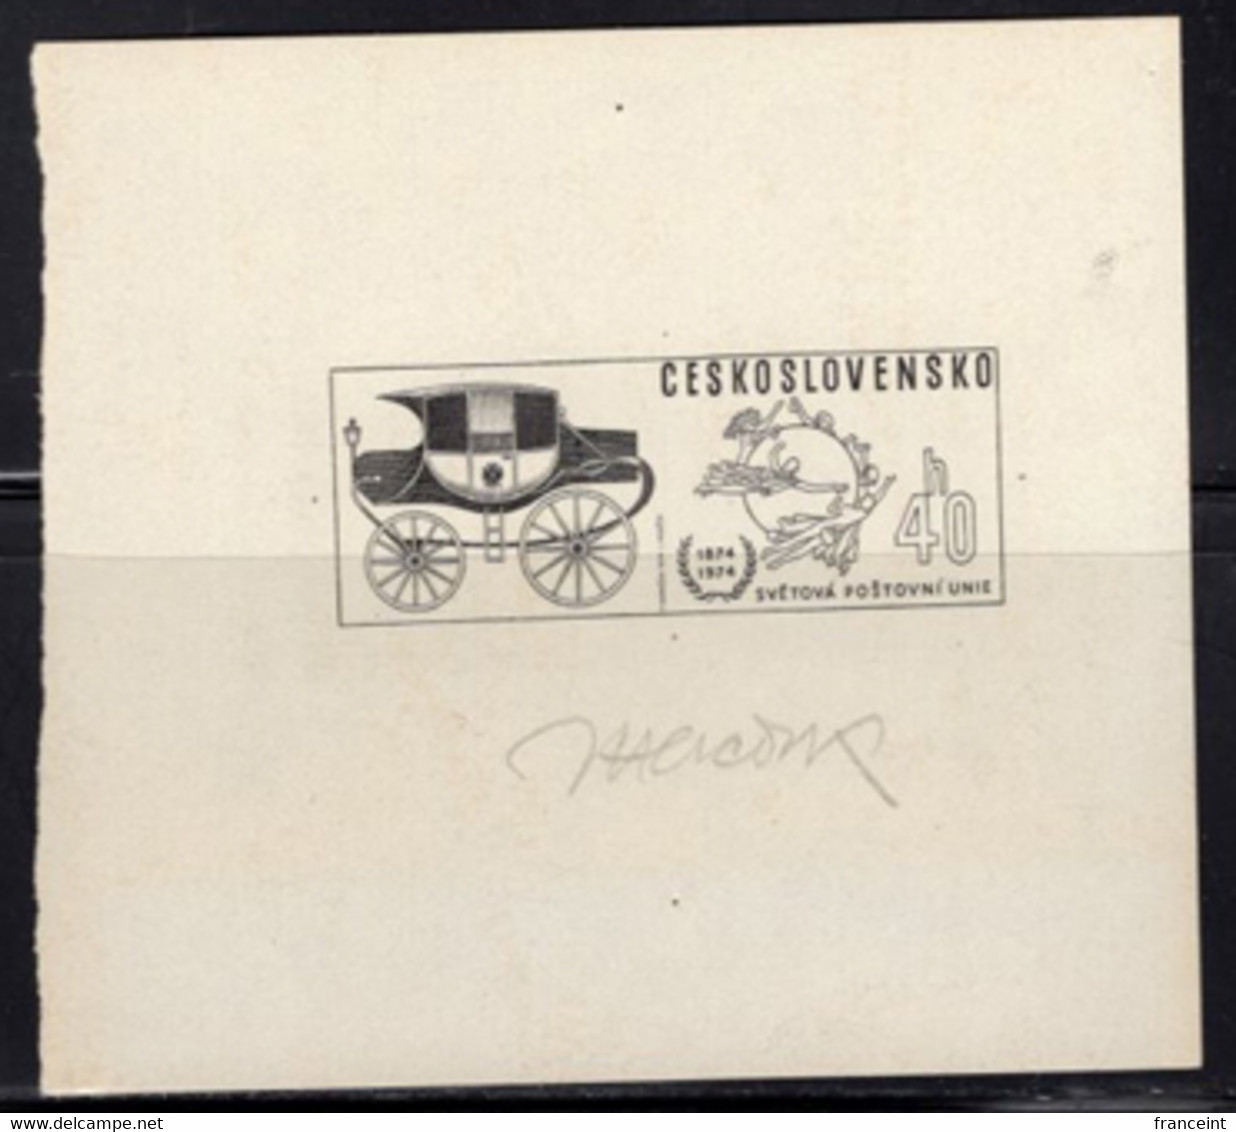 CZECHOSLOVAKIA (1974) Mail Coach. Die Proof In Black Signed By The Engraver MERCIK. UPU Centenary. Scott No 1963. - Proofs & Reprints